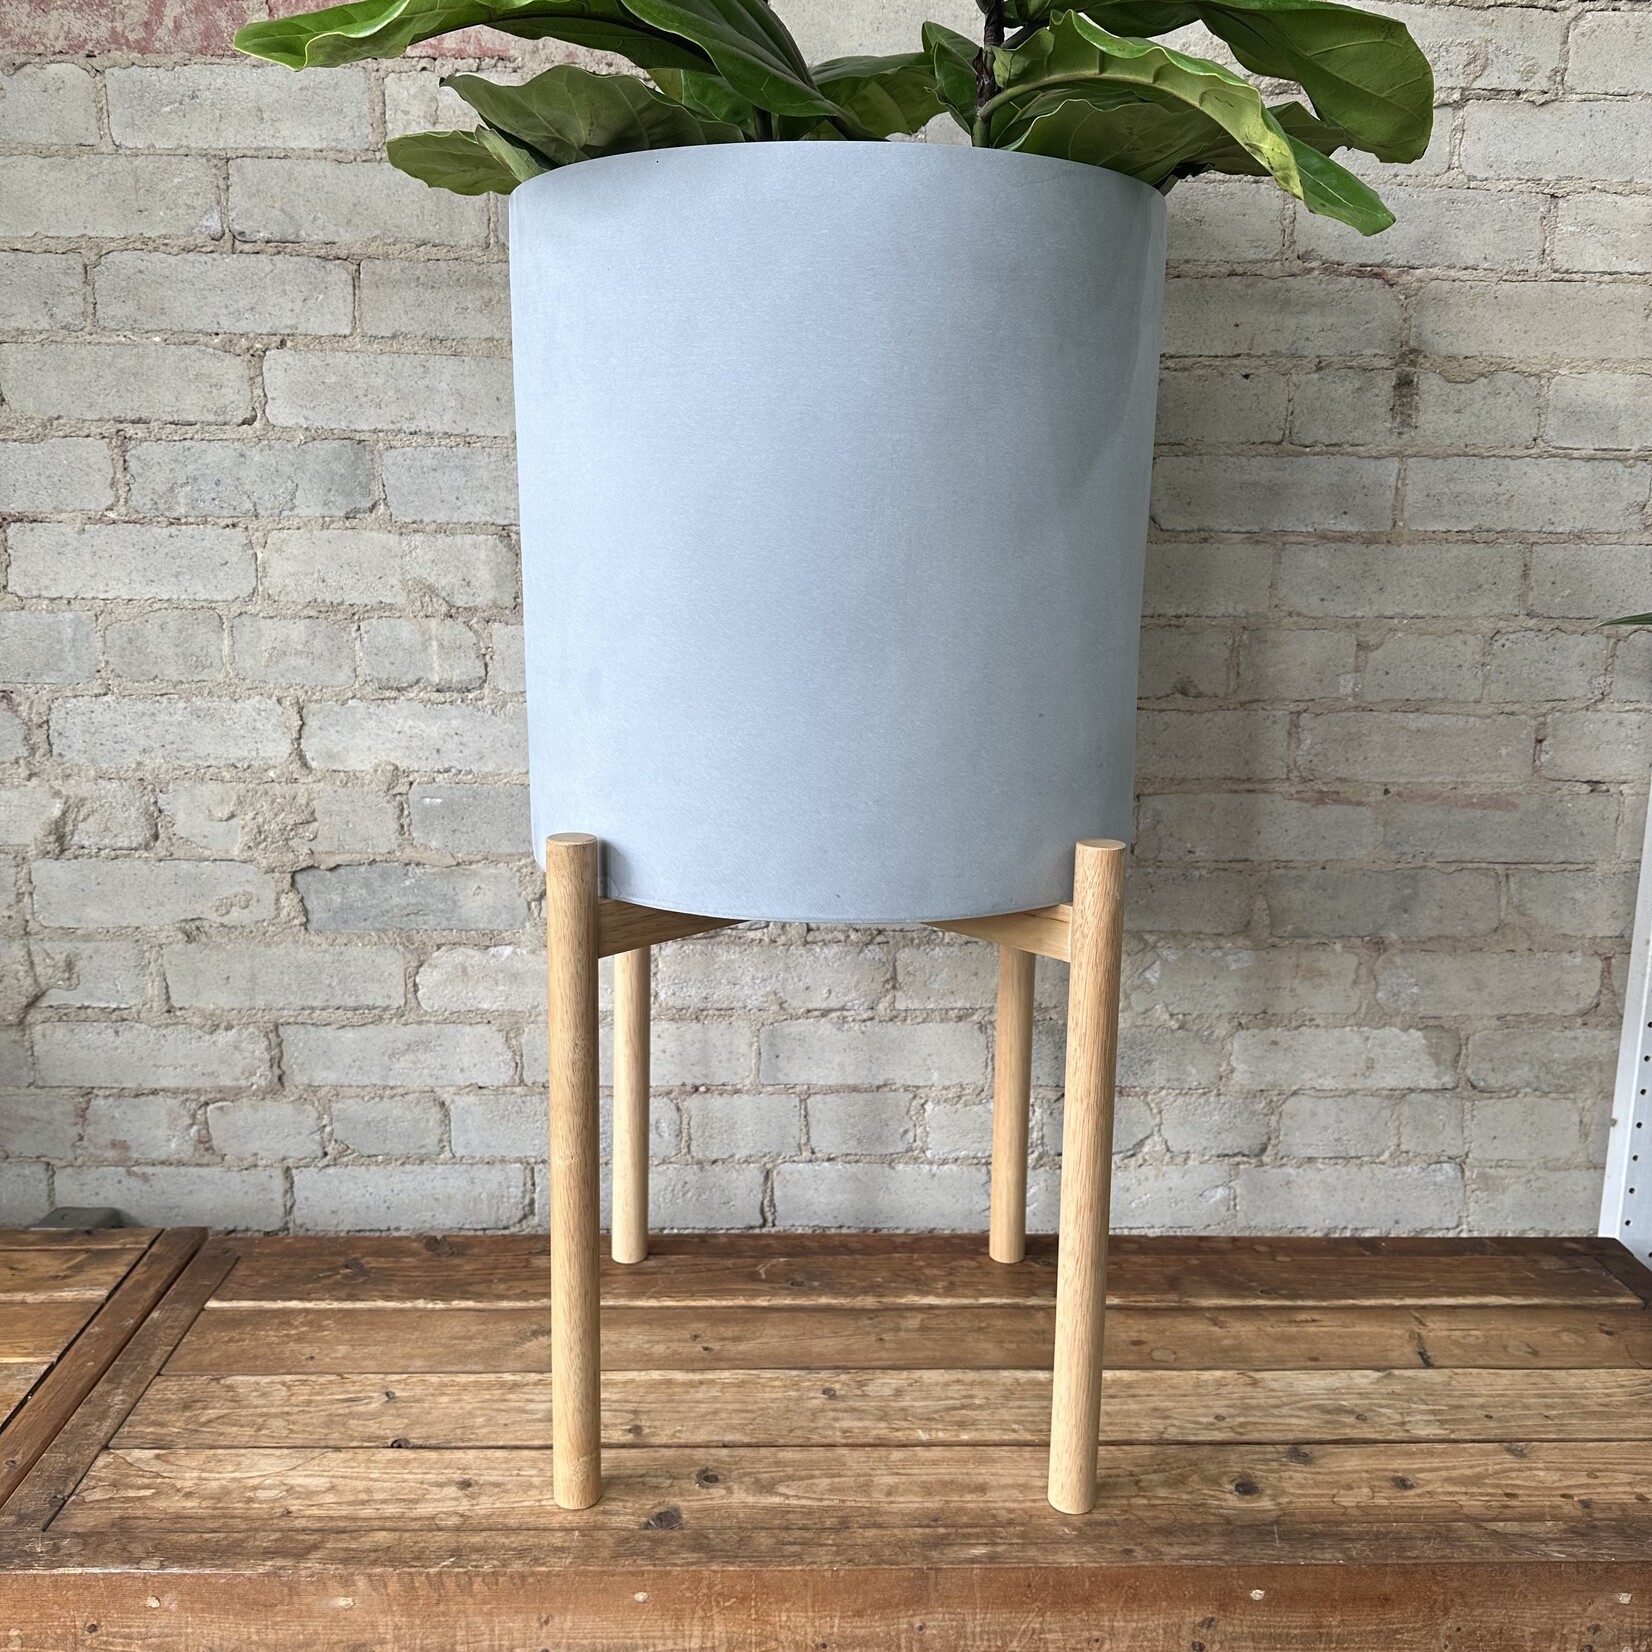 Peach and Pebble XXL Stand (for up to 16" wide pot)